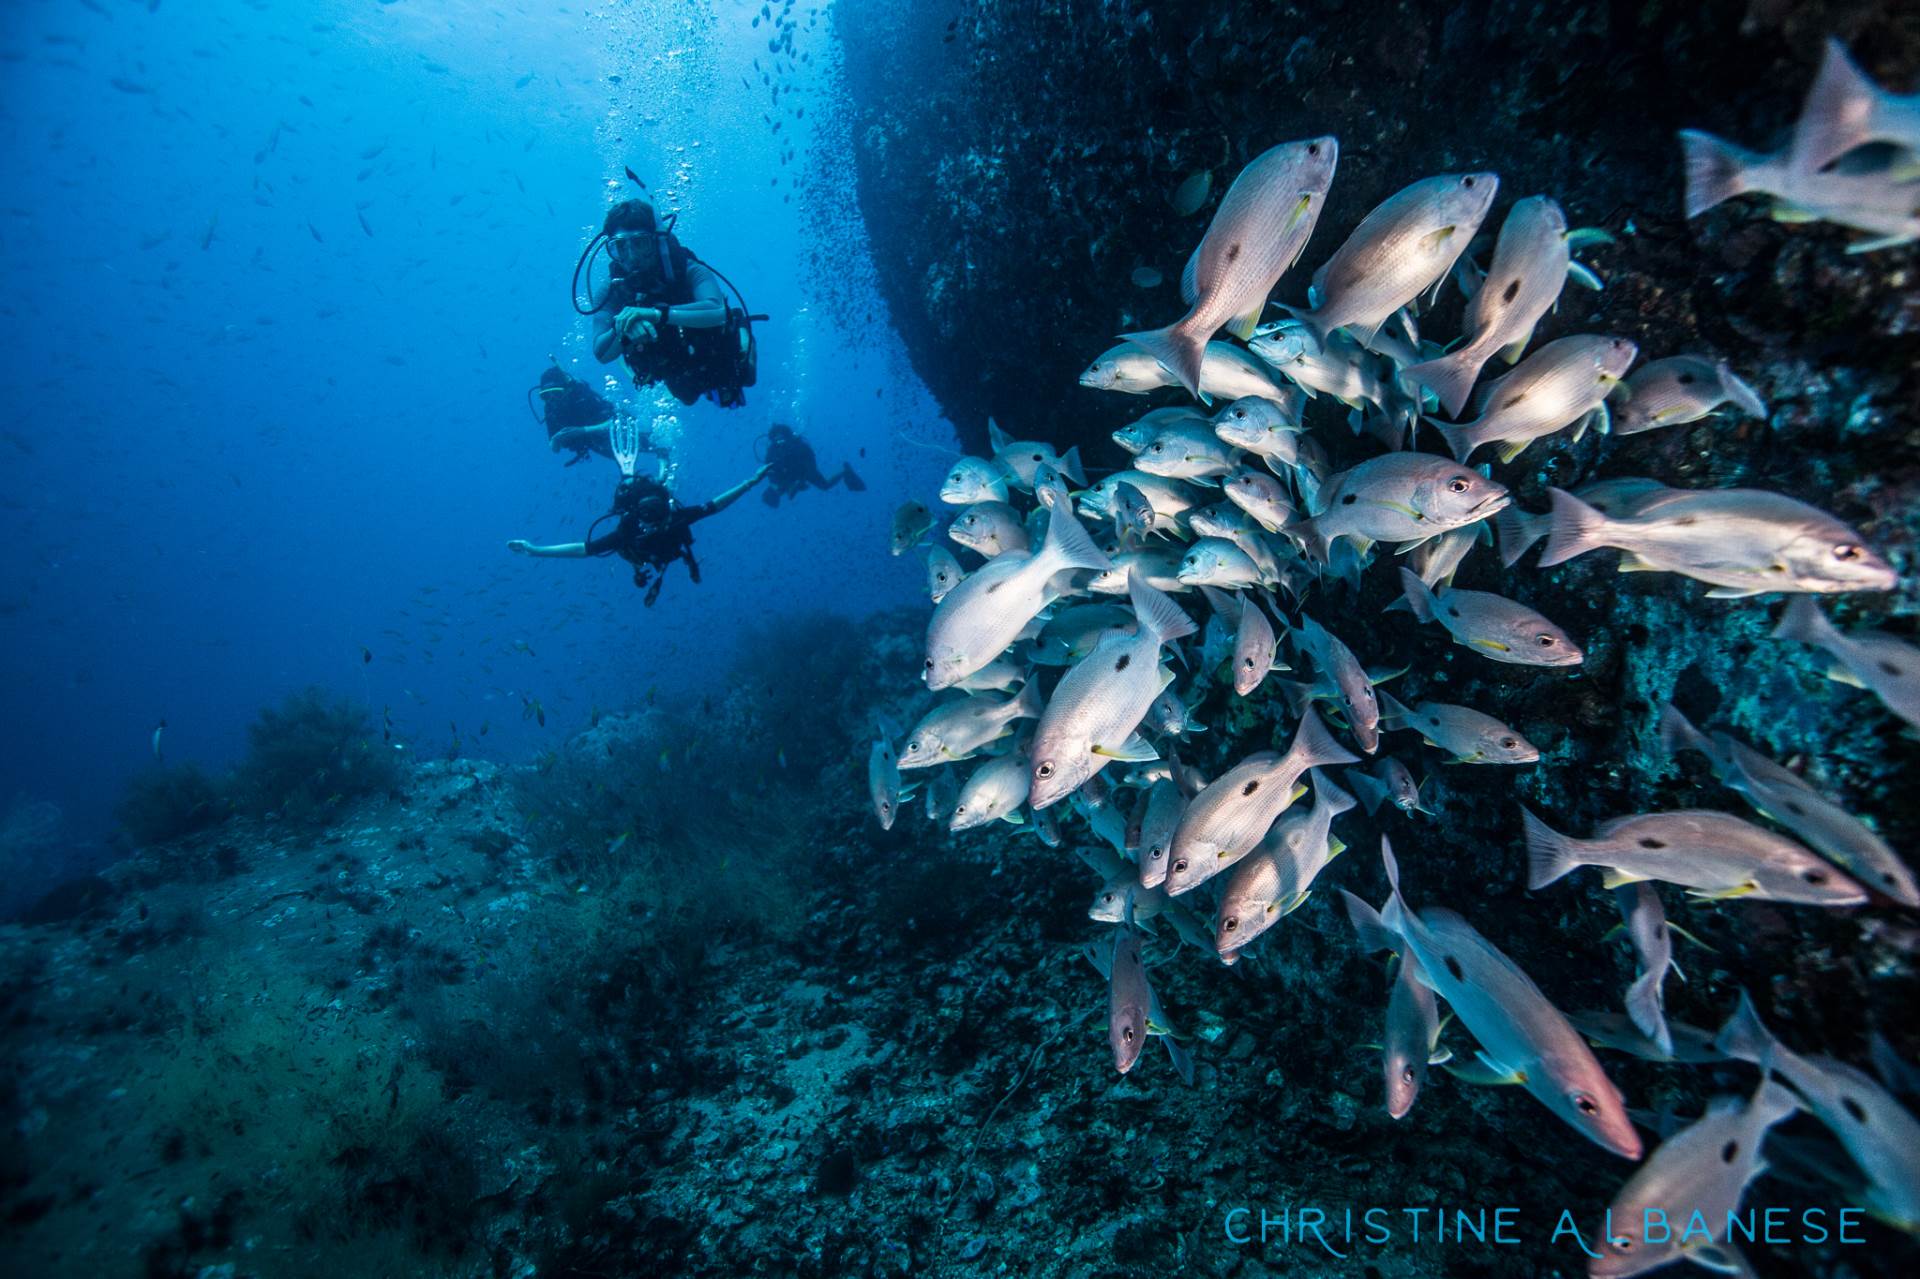 Checking out Barracuda Rock at around 25m depth, a school of one-spot snappers disperses as we approach. Chumphon's reef and sea-life never fails to impress!